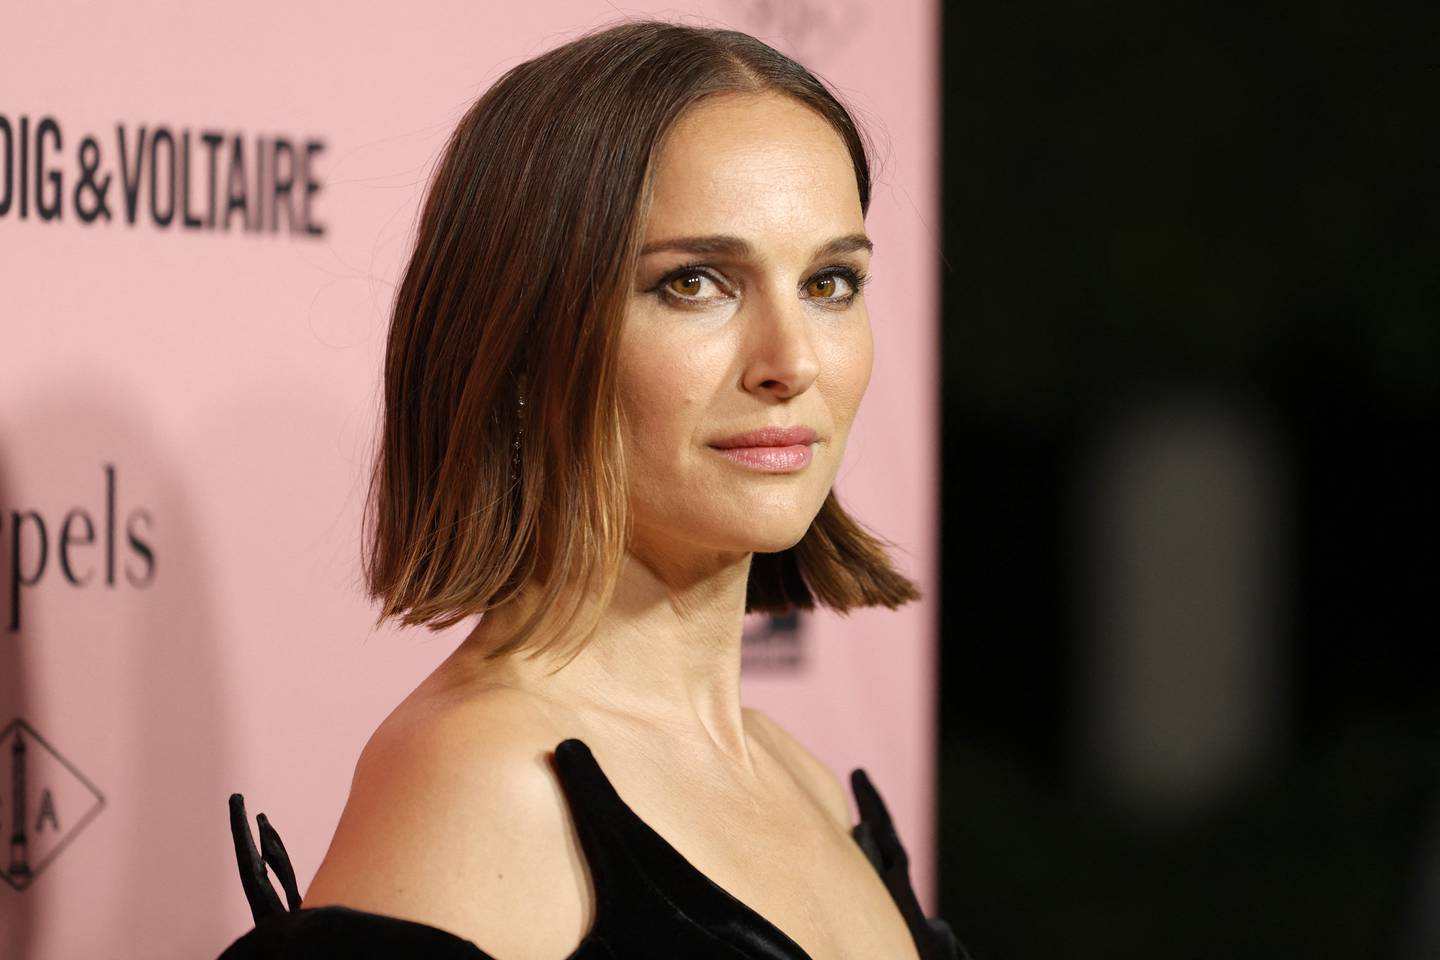 Hollywood actor Natalie Portman has invested in La Vie, a plant-based meat brand. Getty Images